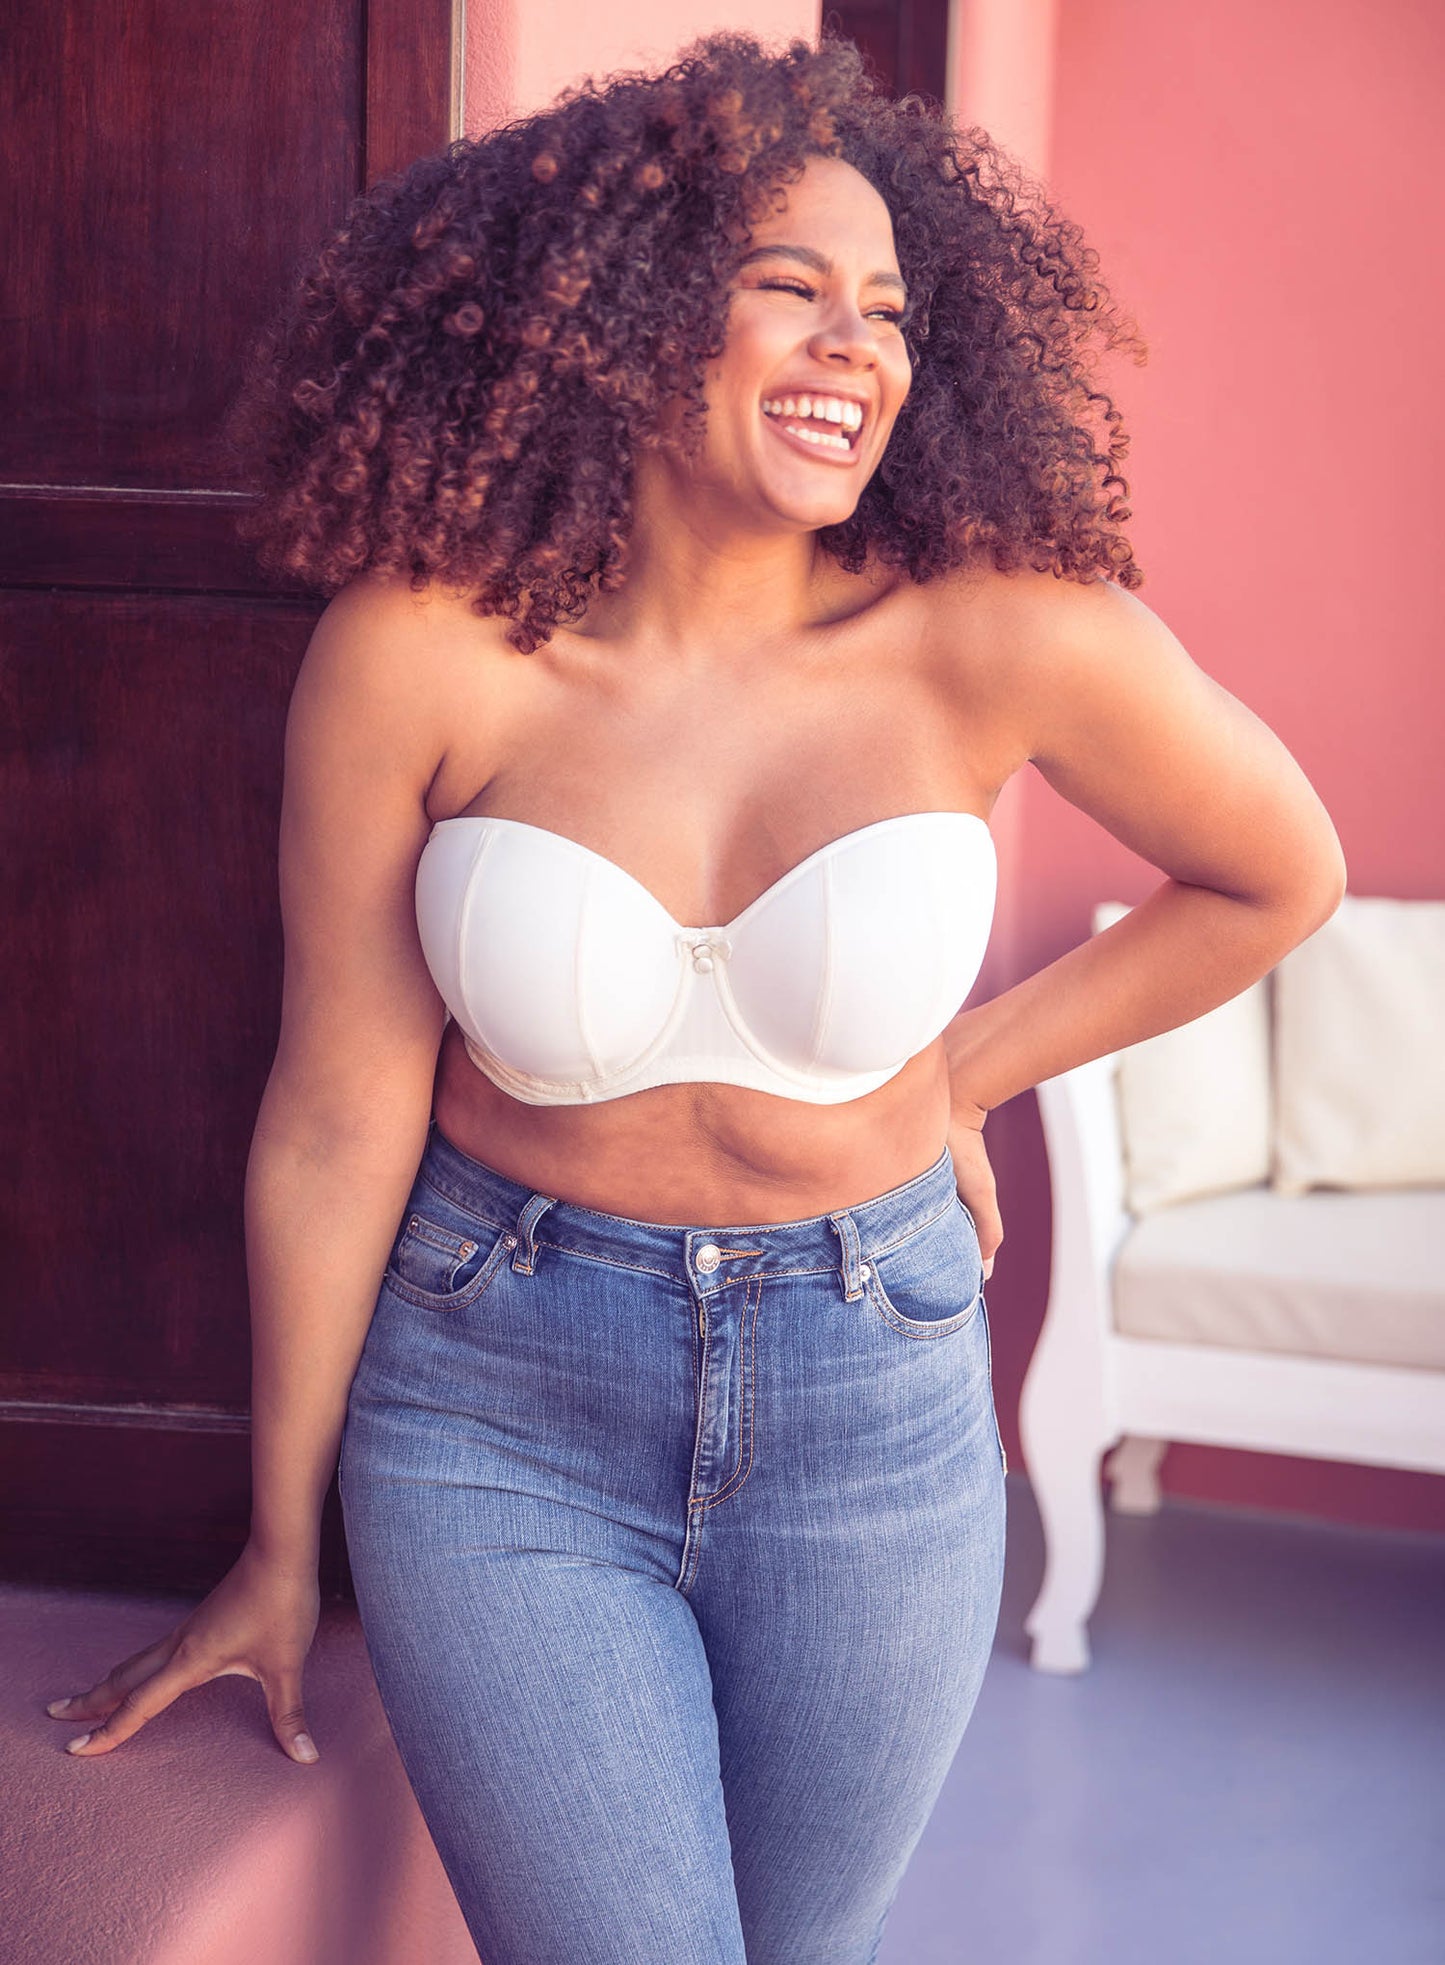 Curvy Kate: Luxe Strapless Bra Ivory